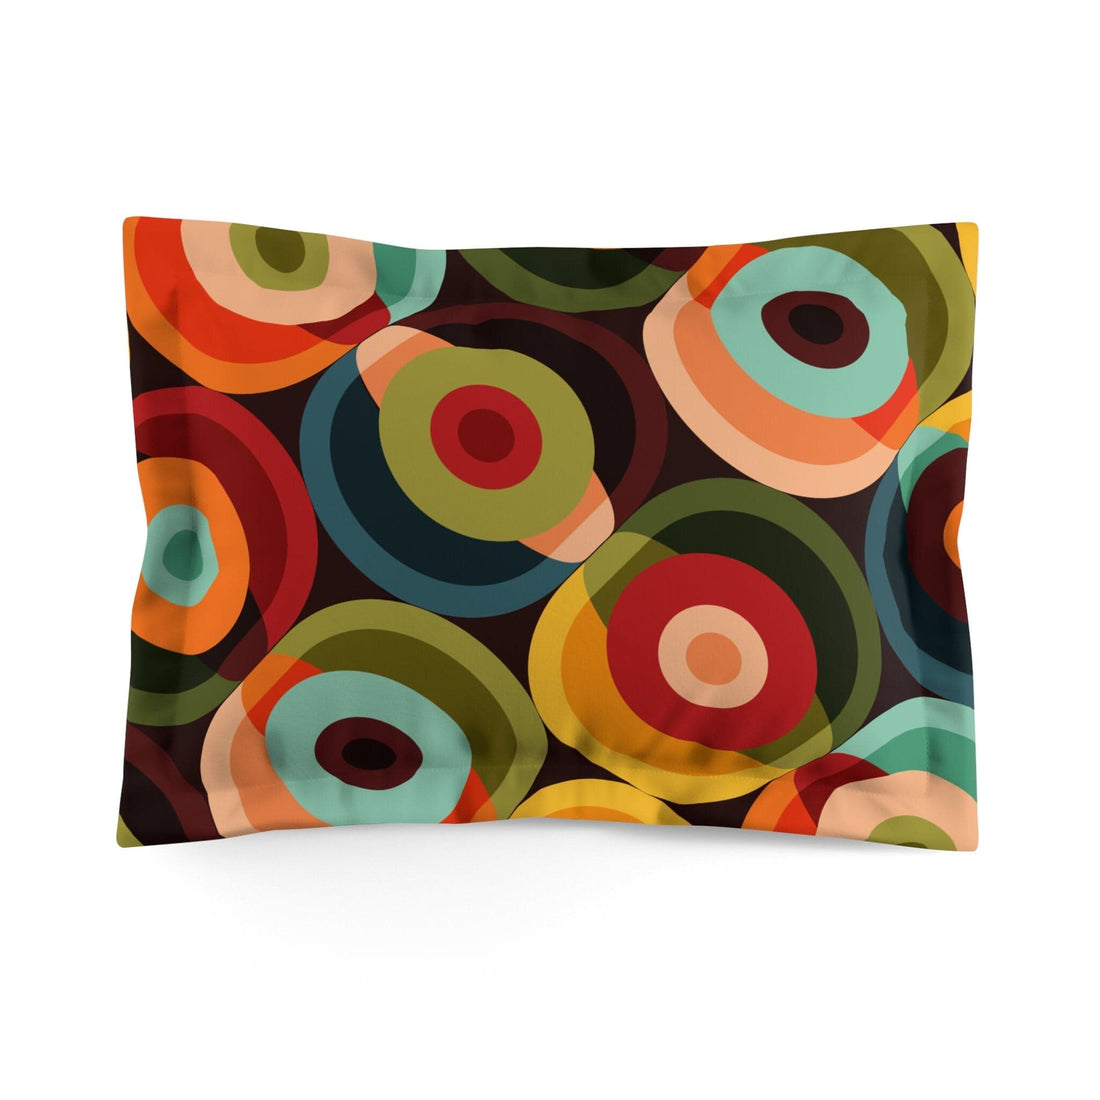 Kate McEnroe New York Retro Groovy Geometric Circle Orbs Pillow Sham, 70s Mid Century Modern Psychedelic Abstract Bedroom Pillow Cover - 132682823Pillow Shams26144799988911770348